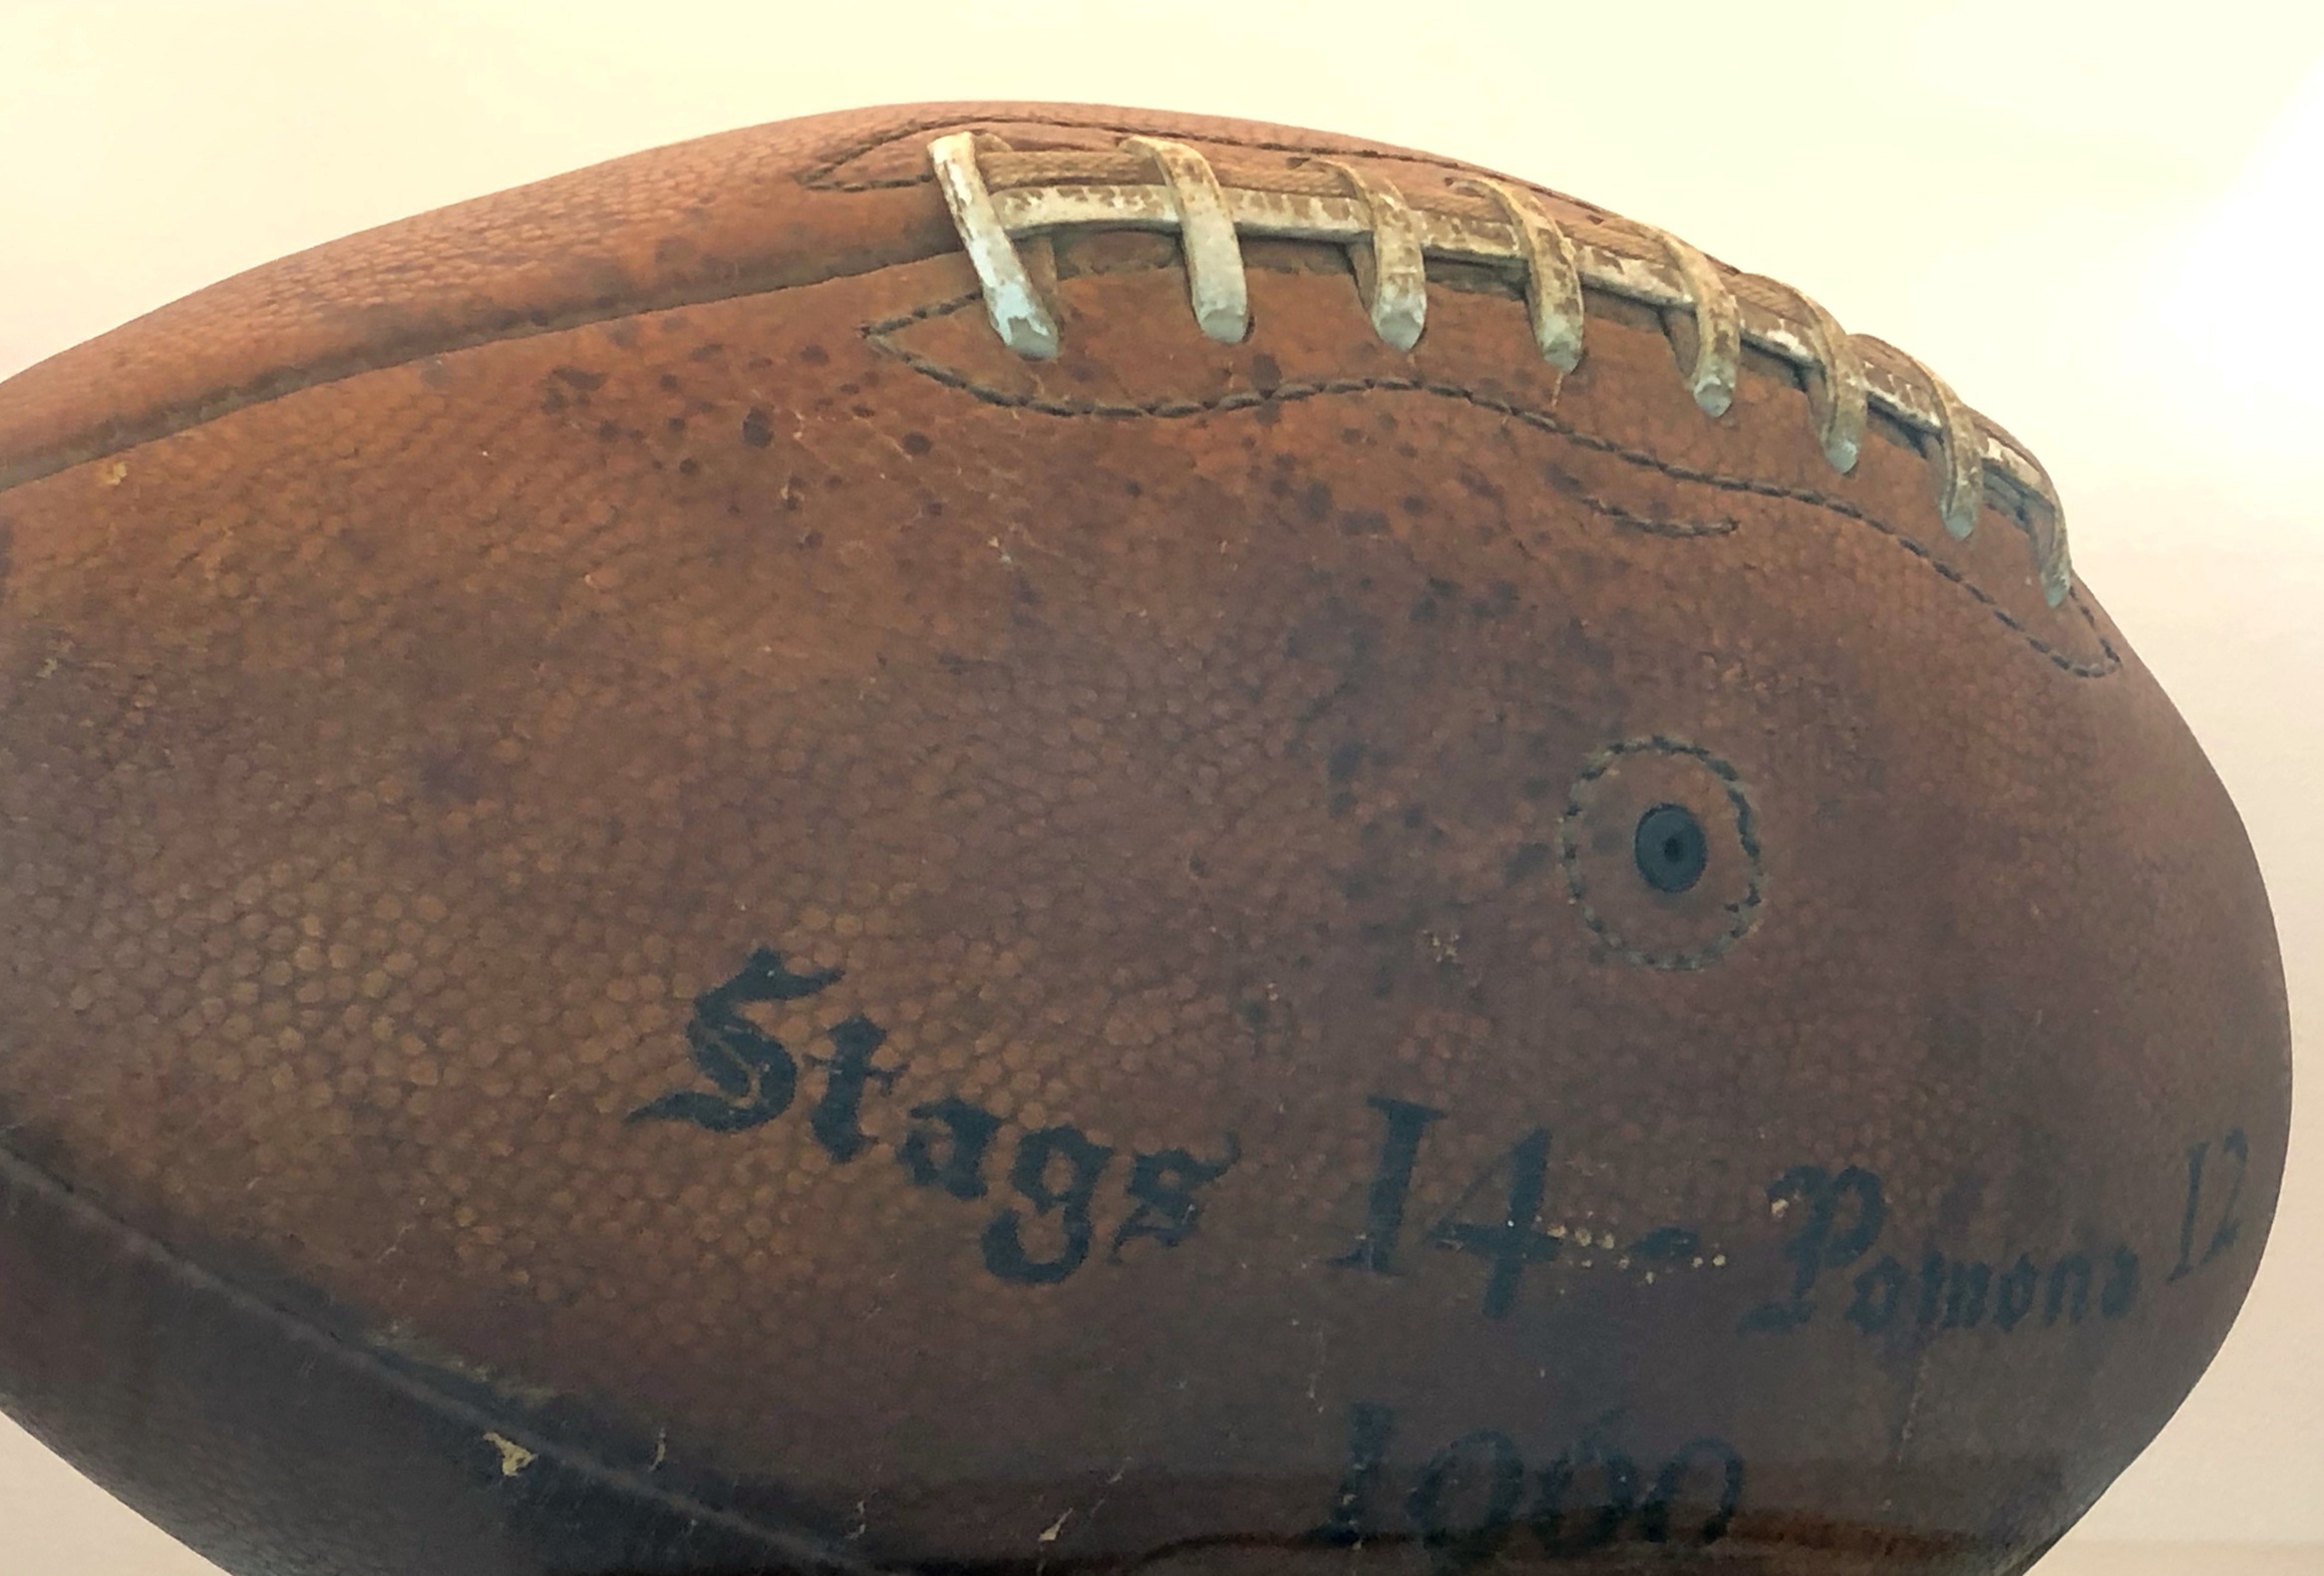 Game ball from the 1960 Pomona game with the final score written on it: Stags 14, Pomona 12